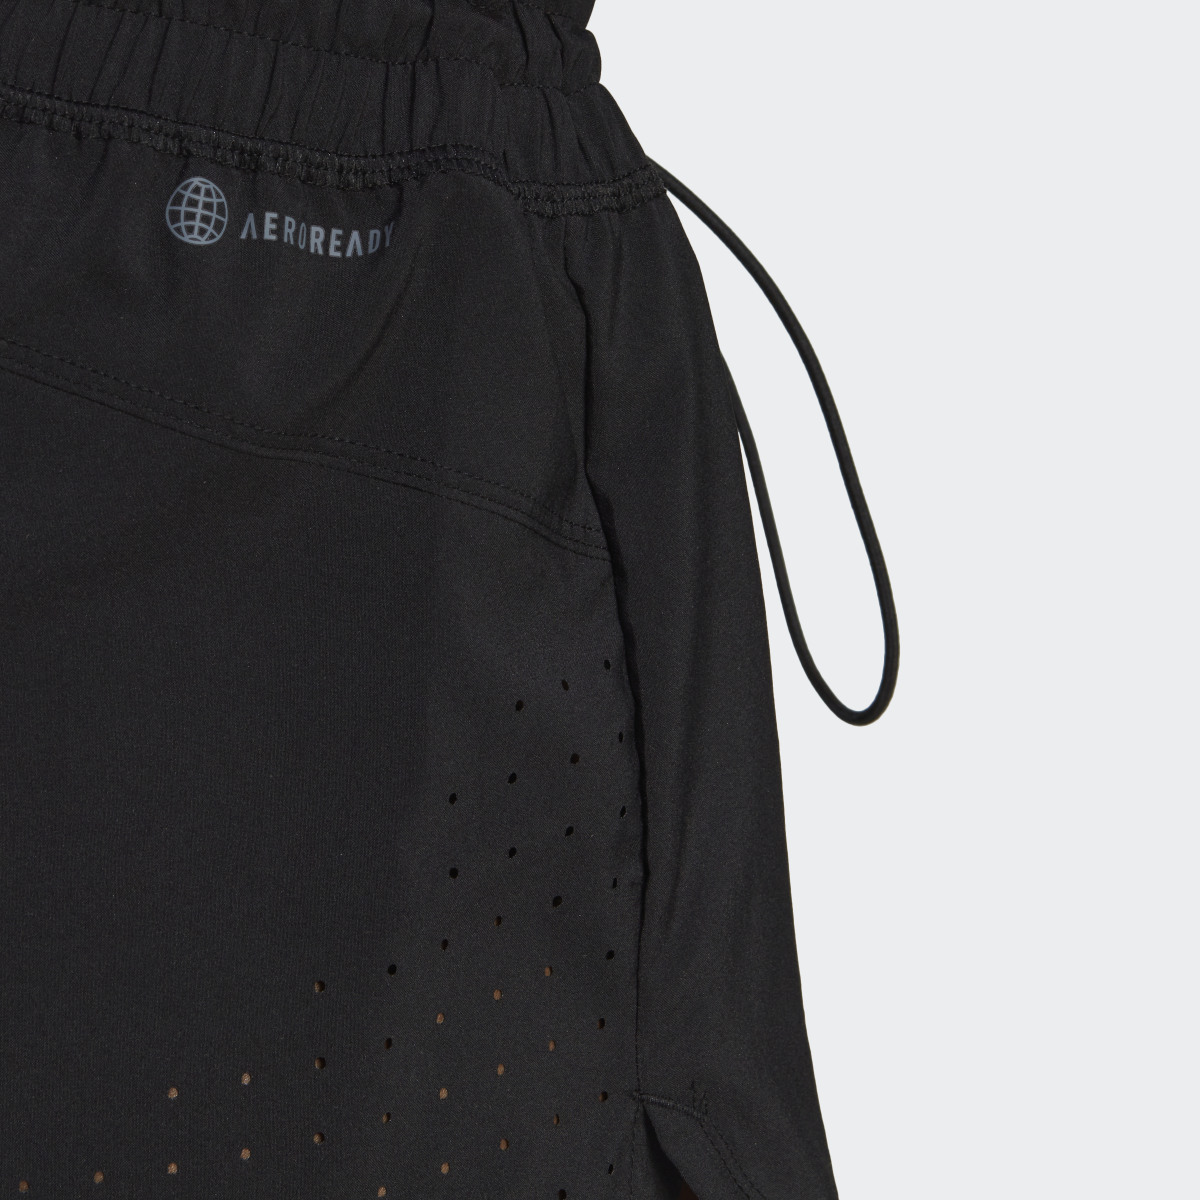 Adidas Perforated Pacer Shorts. 6